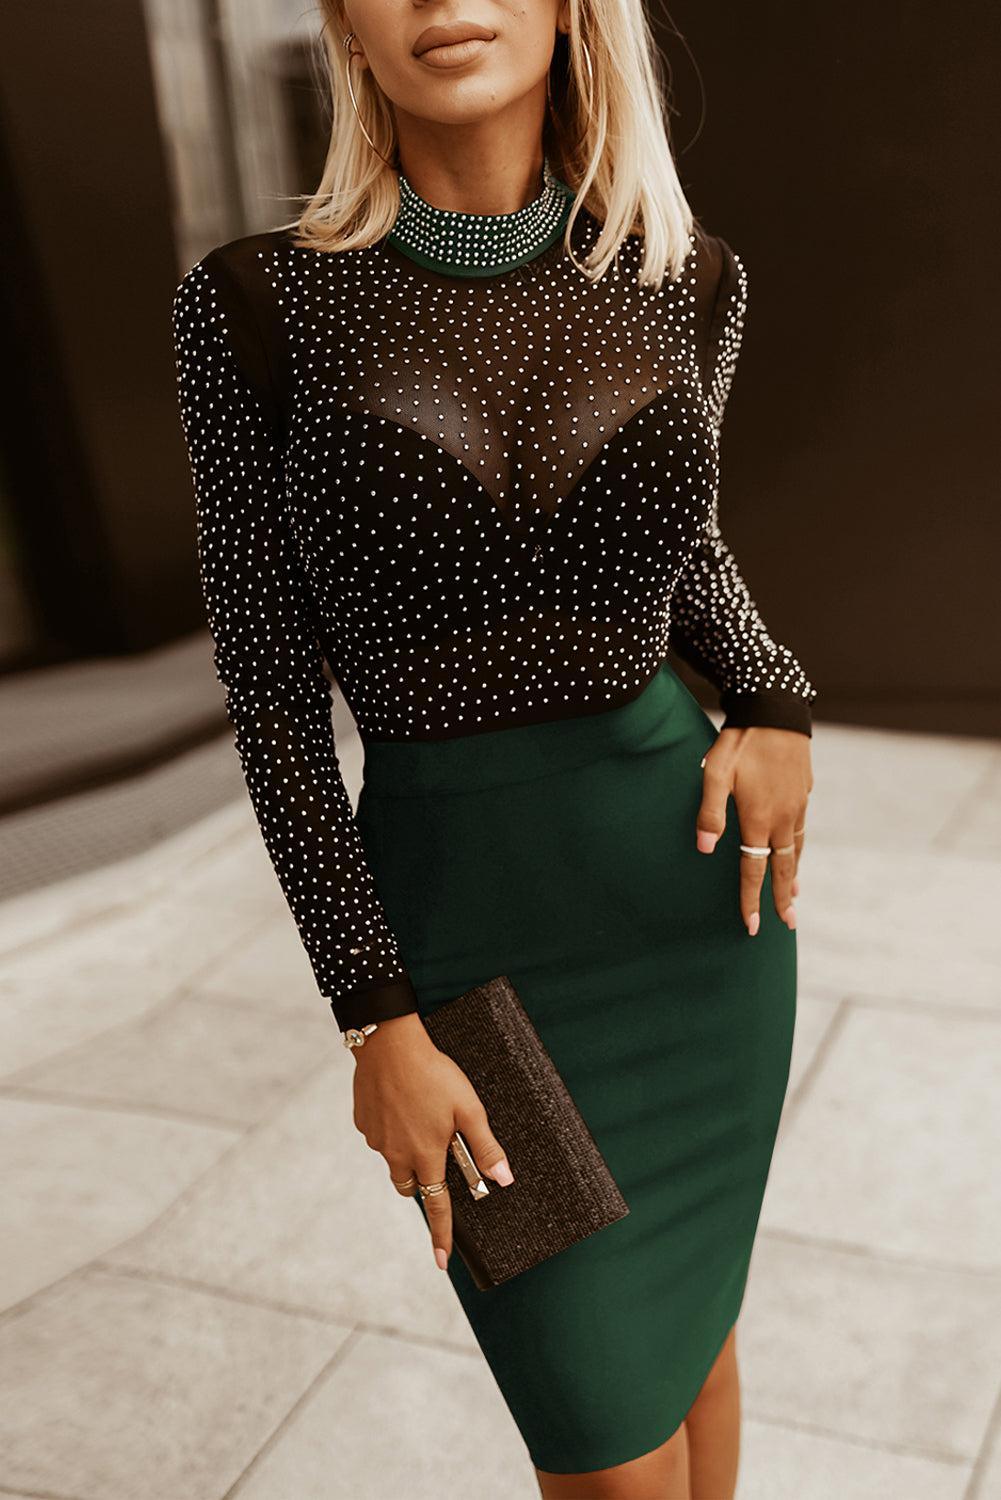 a woman in a black top and green skirt